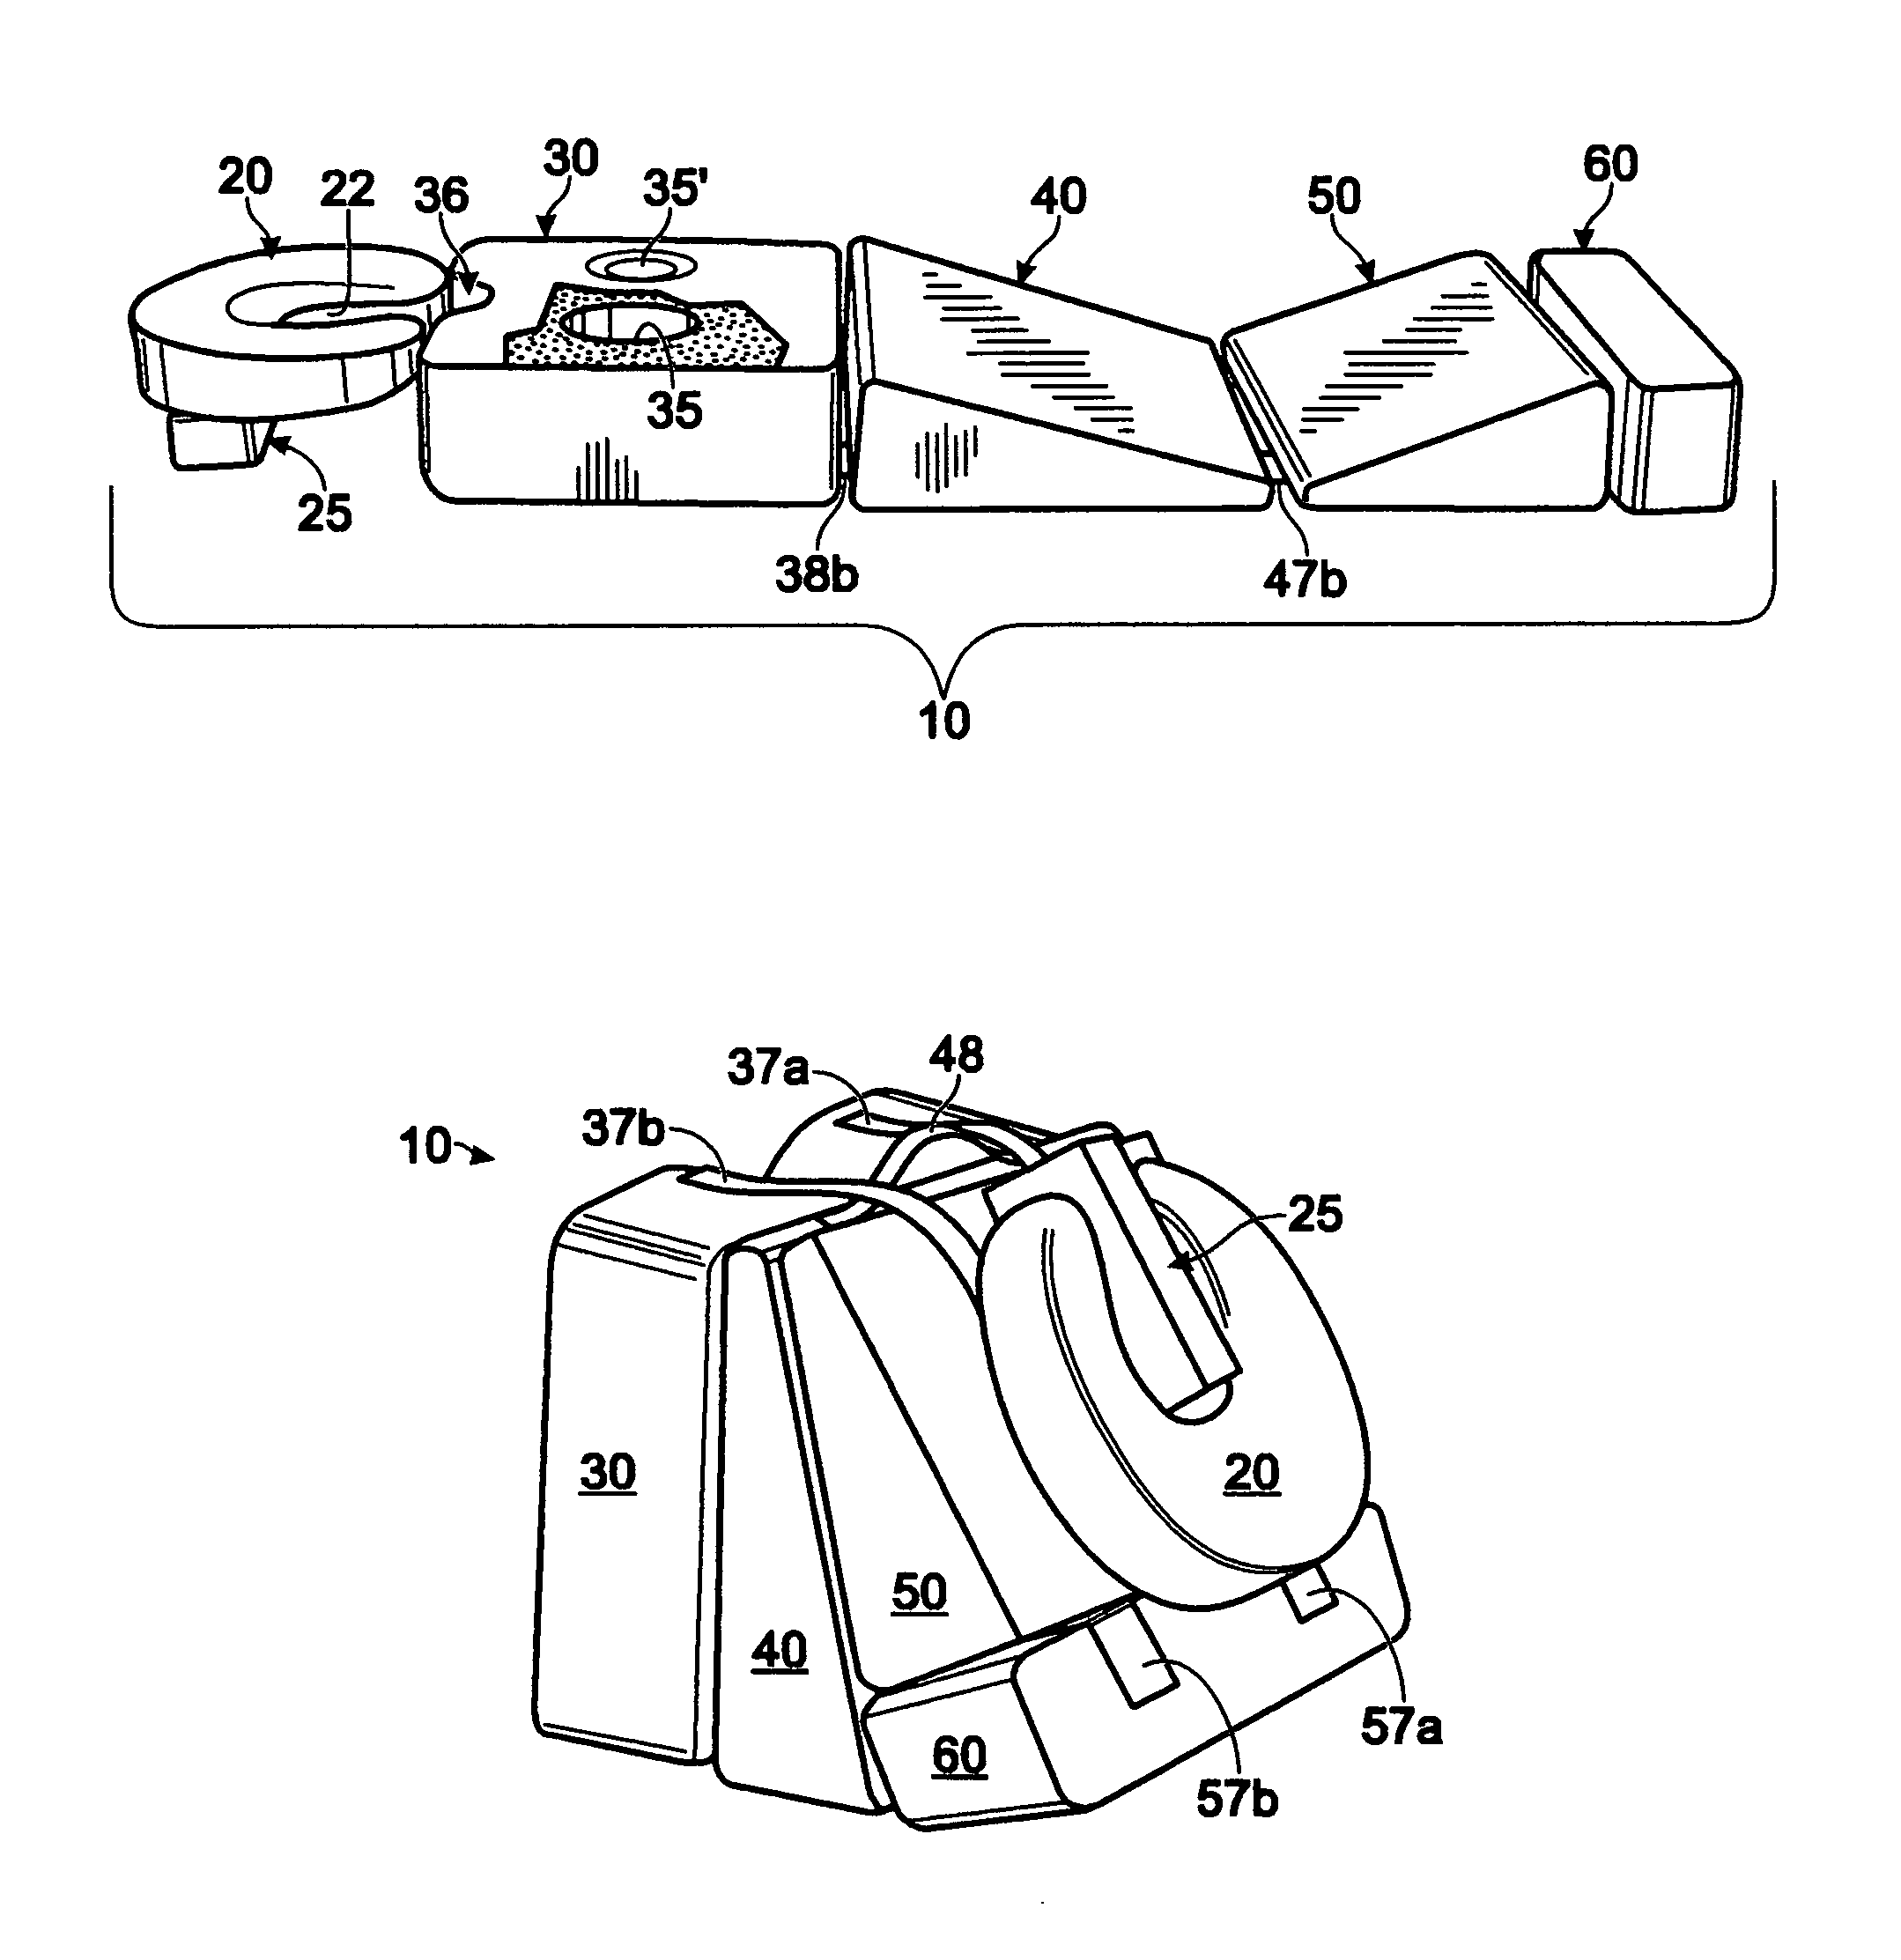 Cushion set for positioning a human body